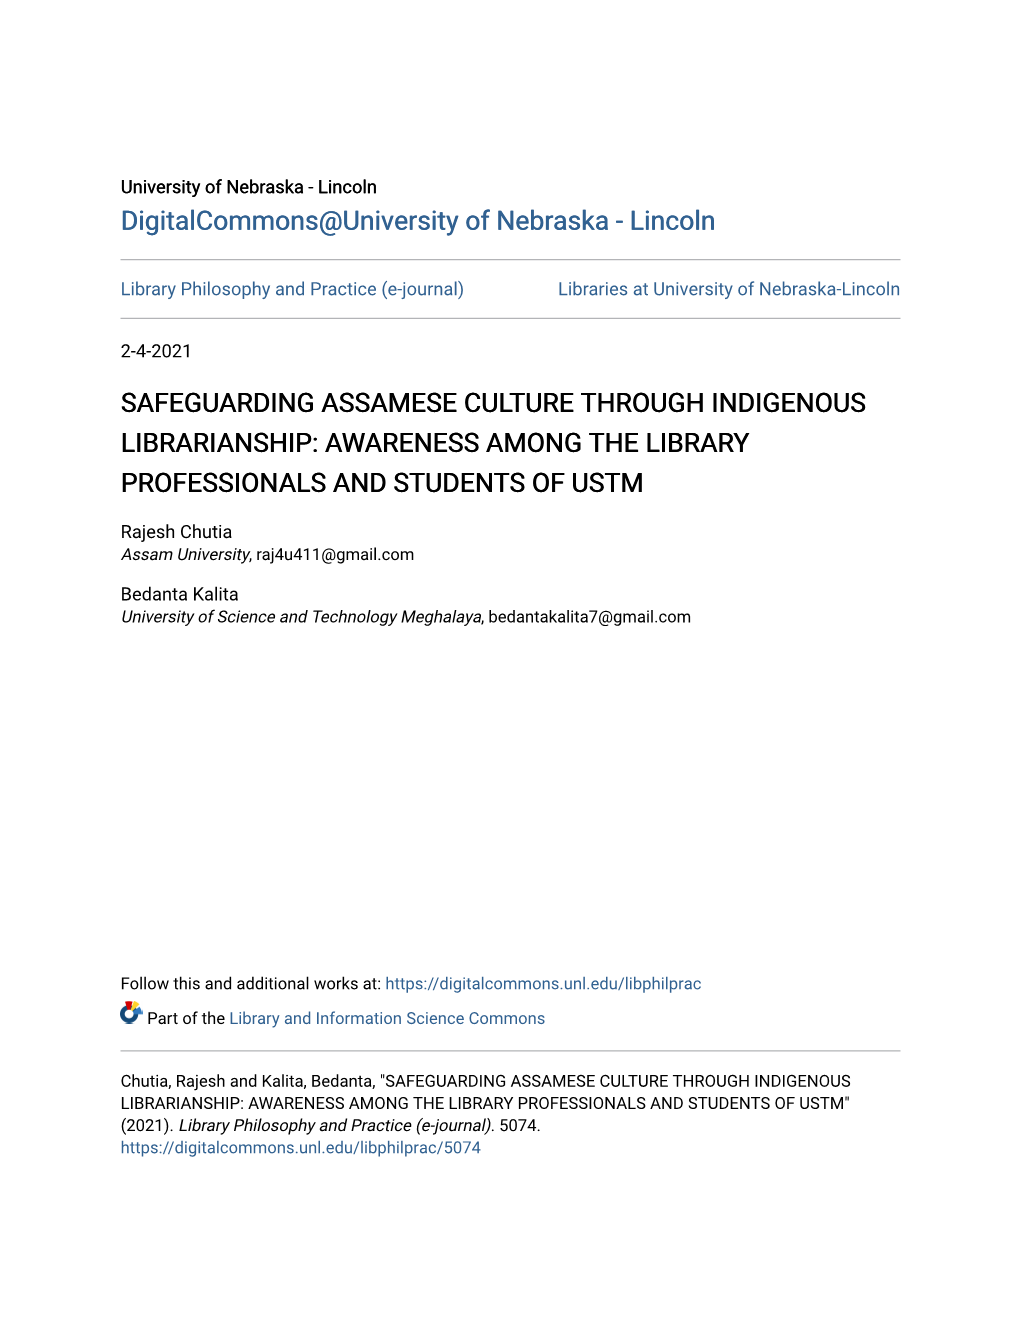 Safeguarding Assamese Culture Through Indigenous Librarianship: Awareness Among the Library Professionals and Students of Ustm